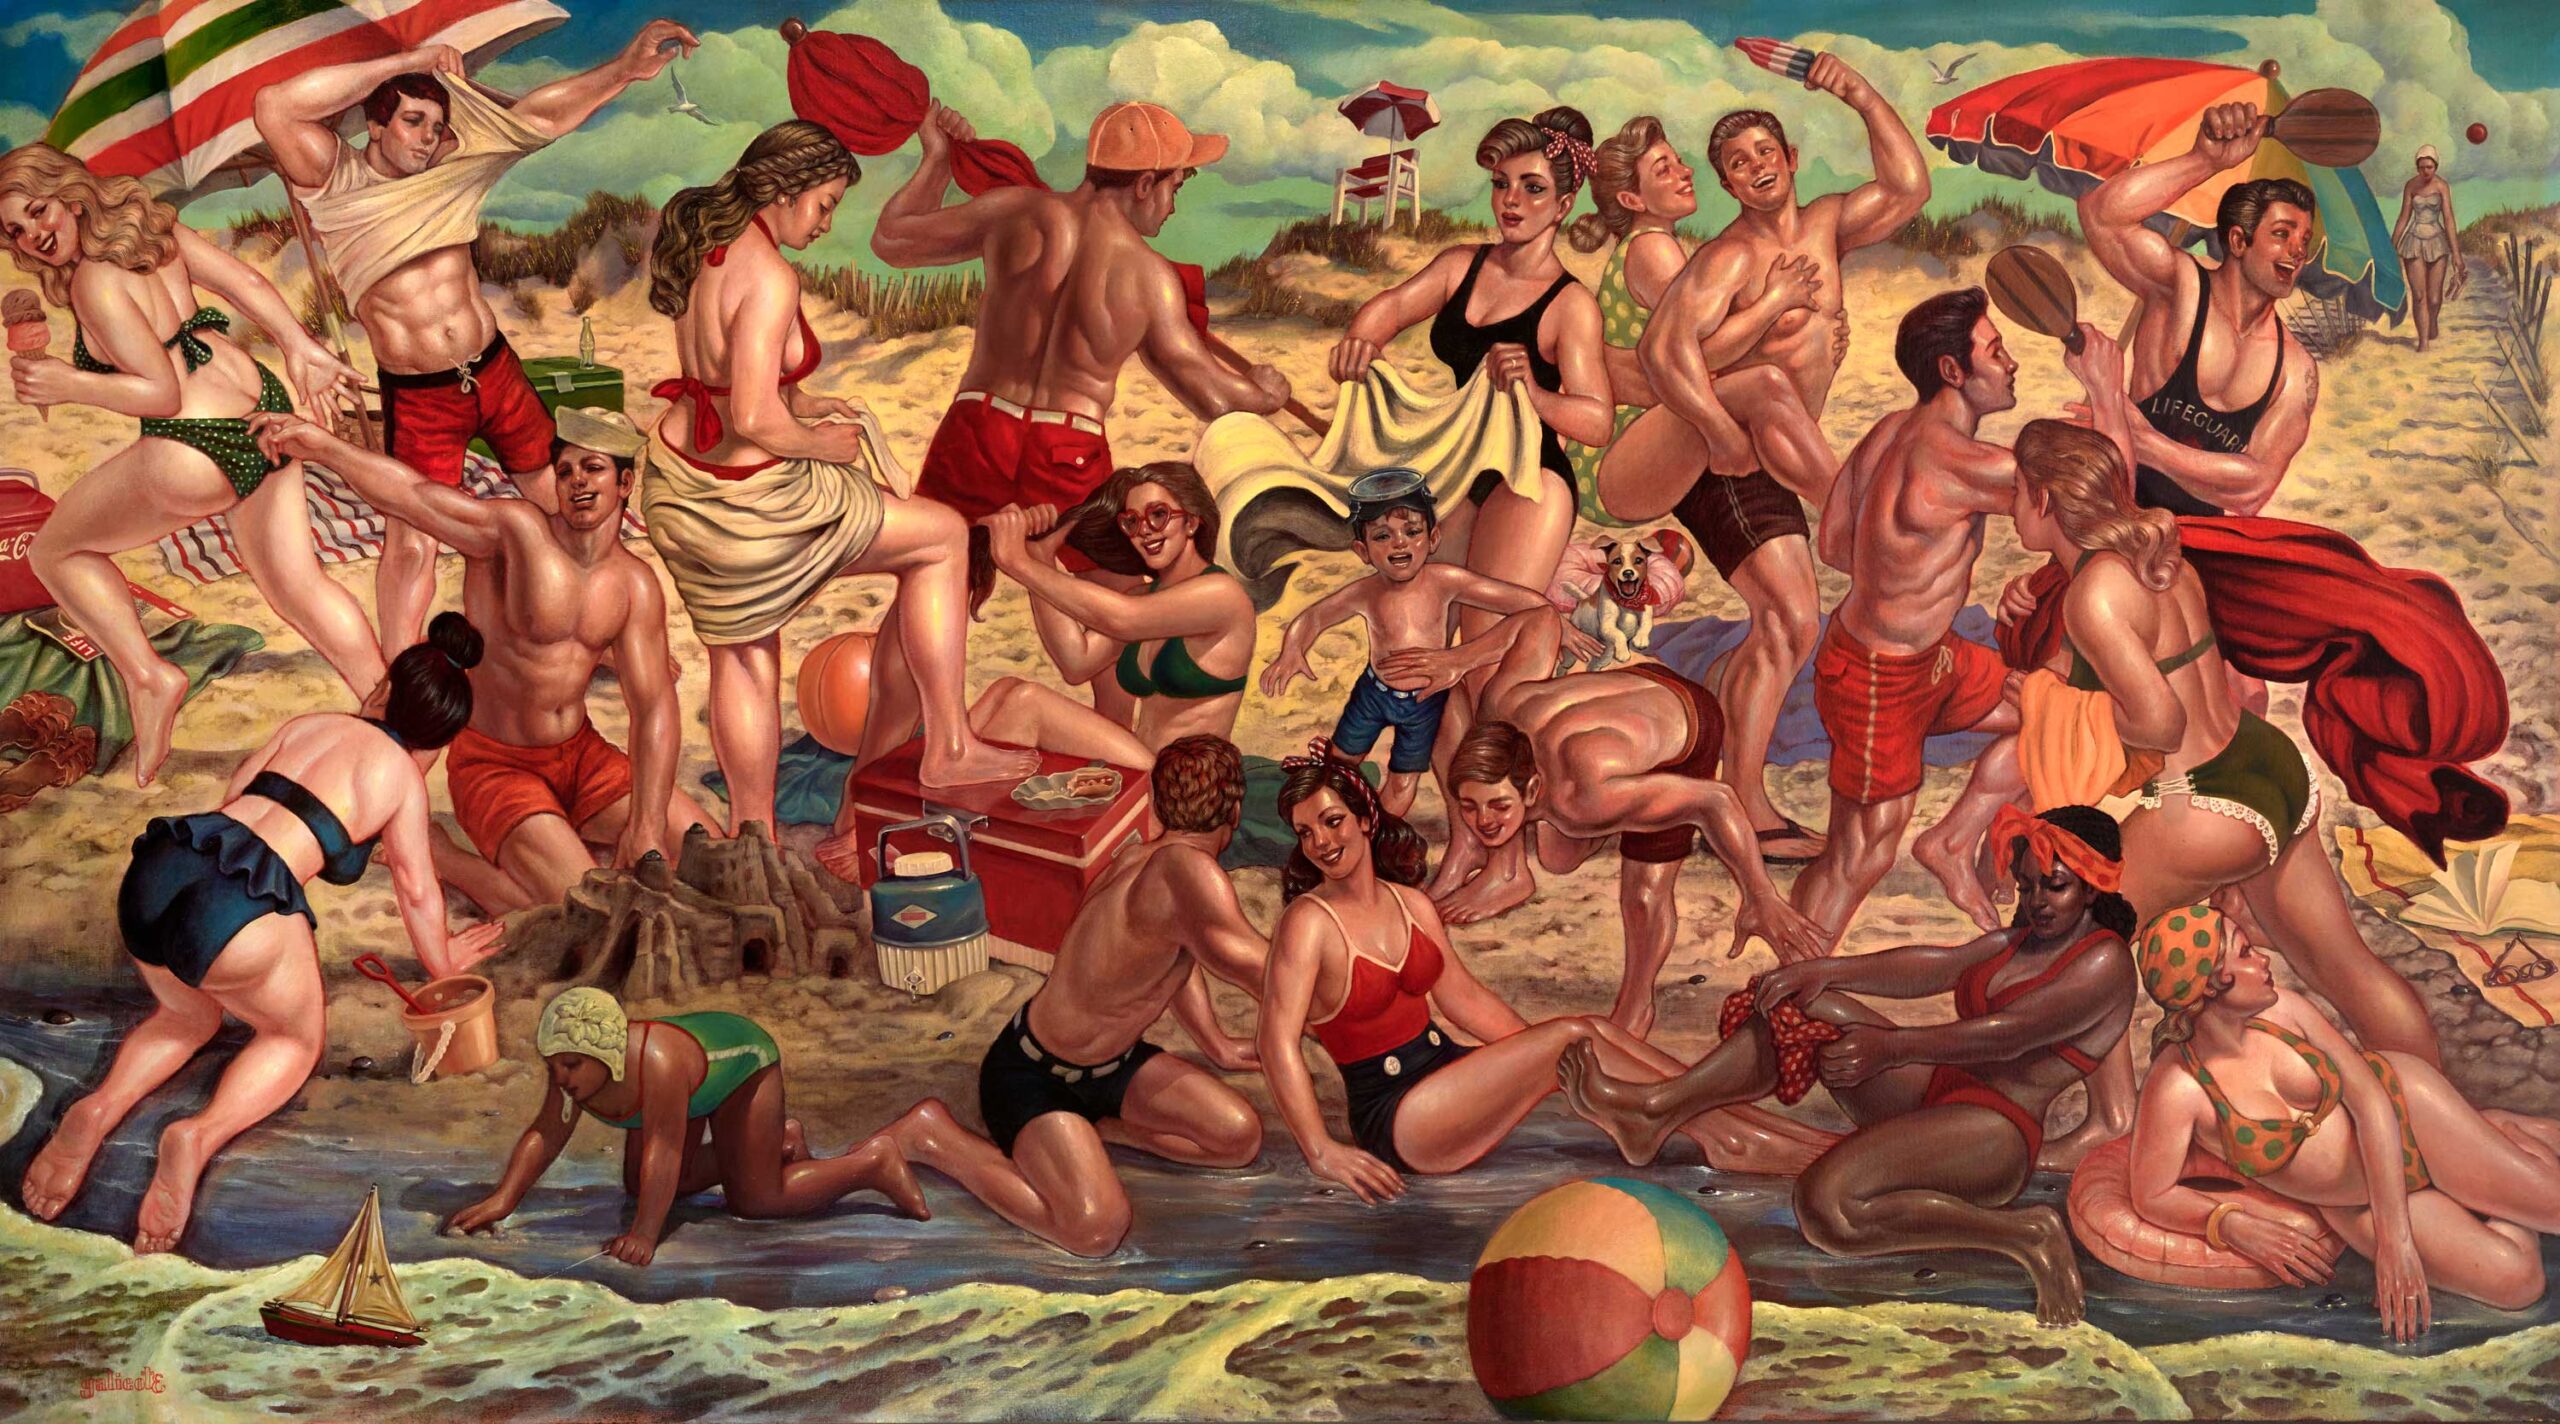 Danny Galieote (b. 1968), "Beach Bevy," c.2020, Oil and acrylic on canvas, 42 x 73 in., The Hilbert Museum of California Art at Chapman University, Gift of the Hilbert Collection